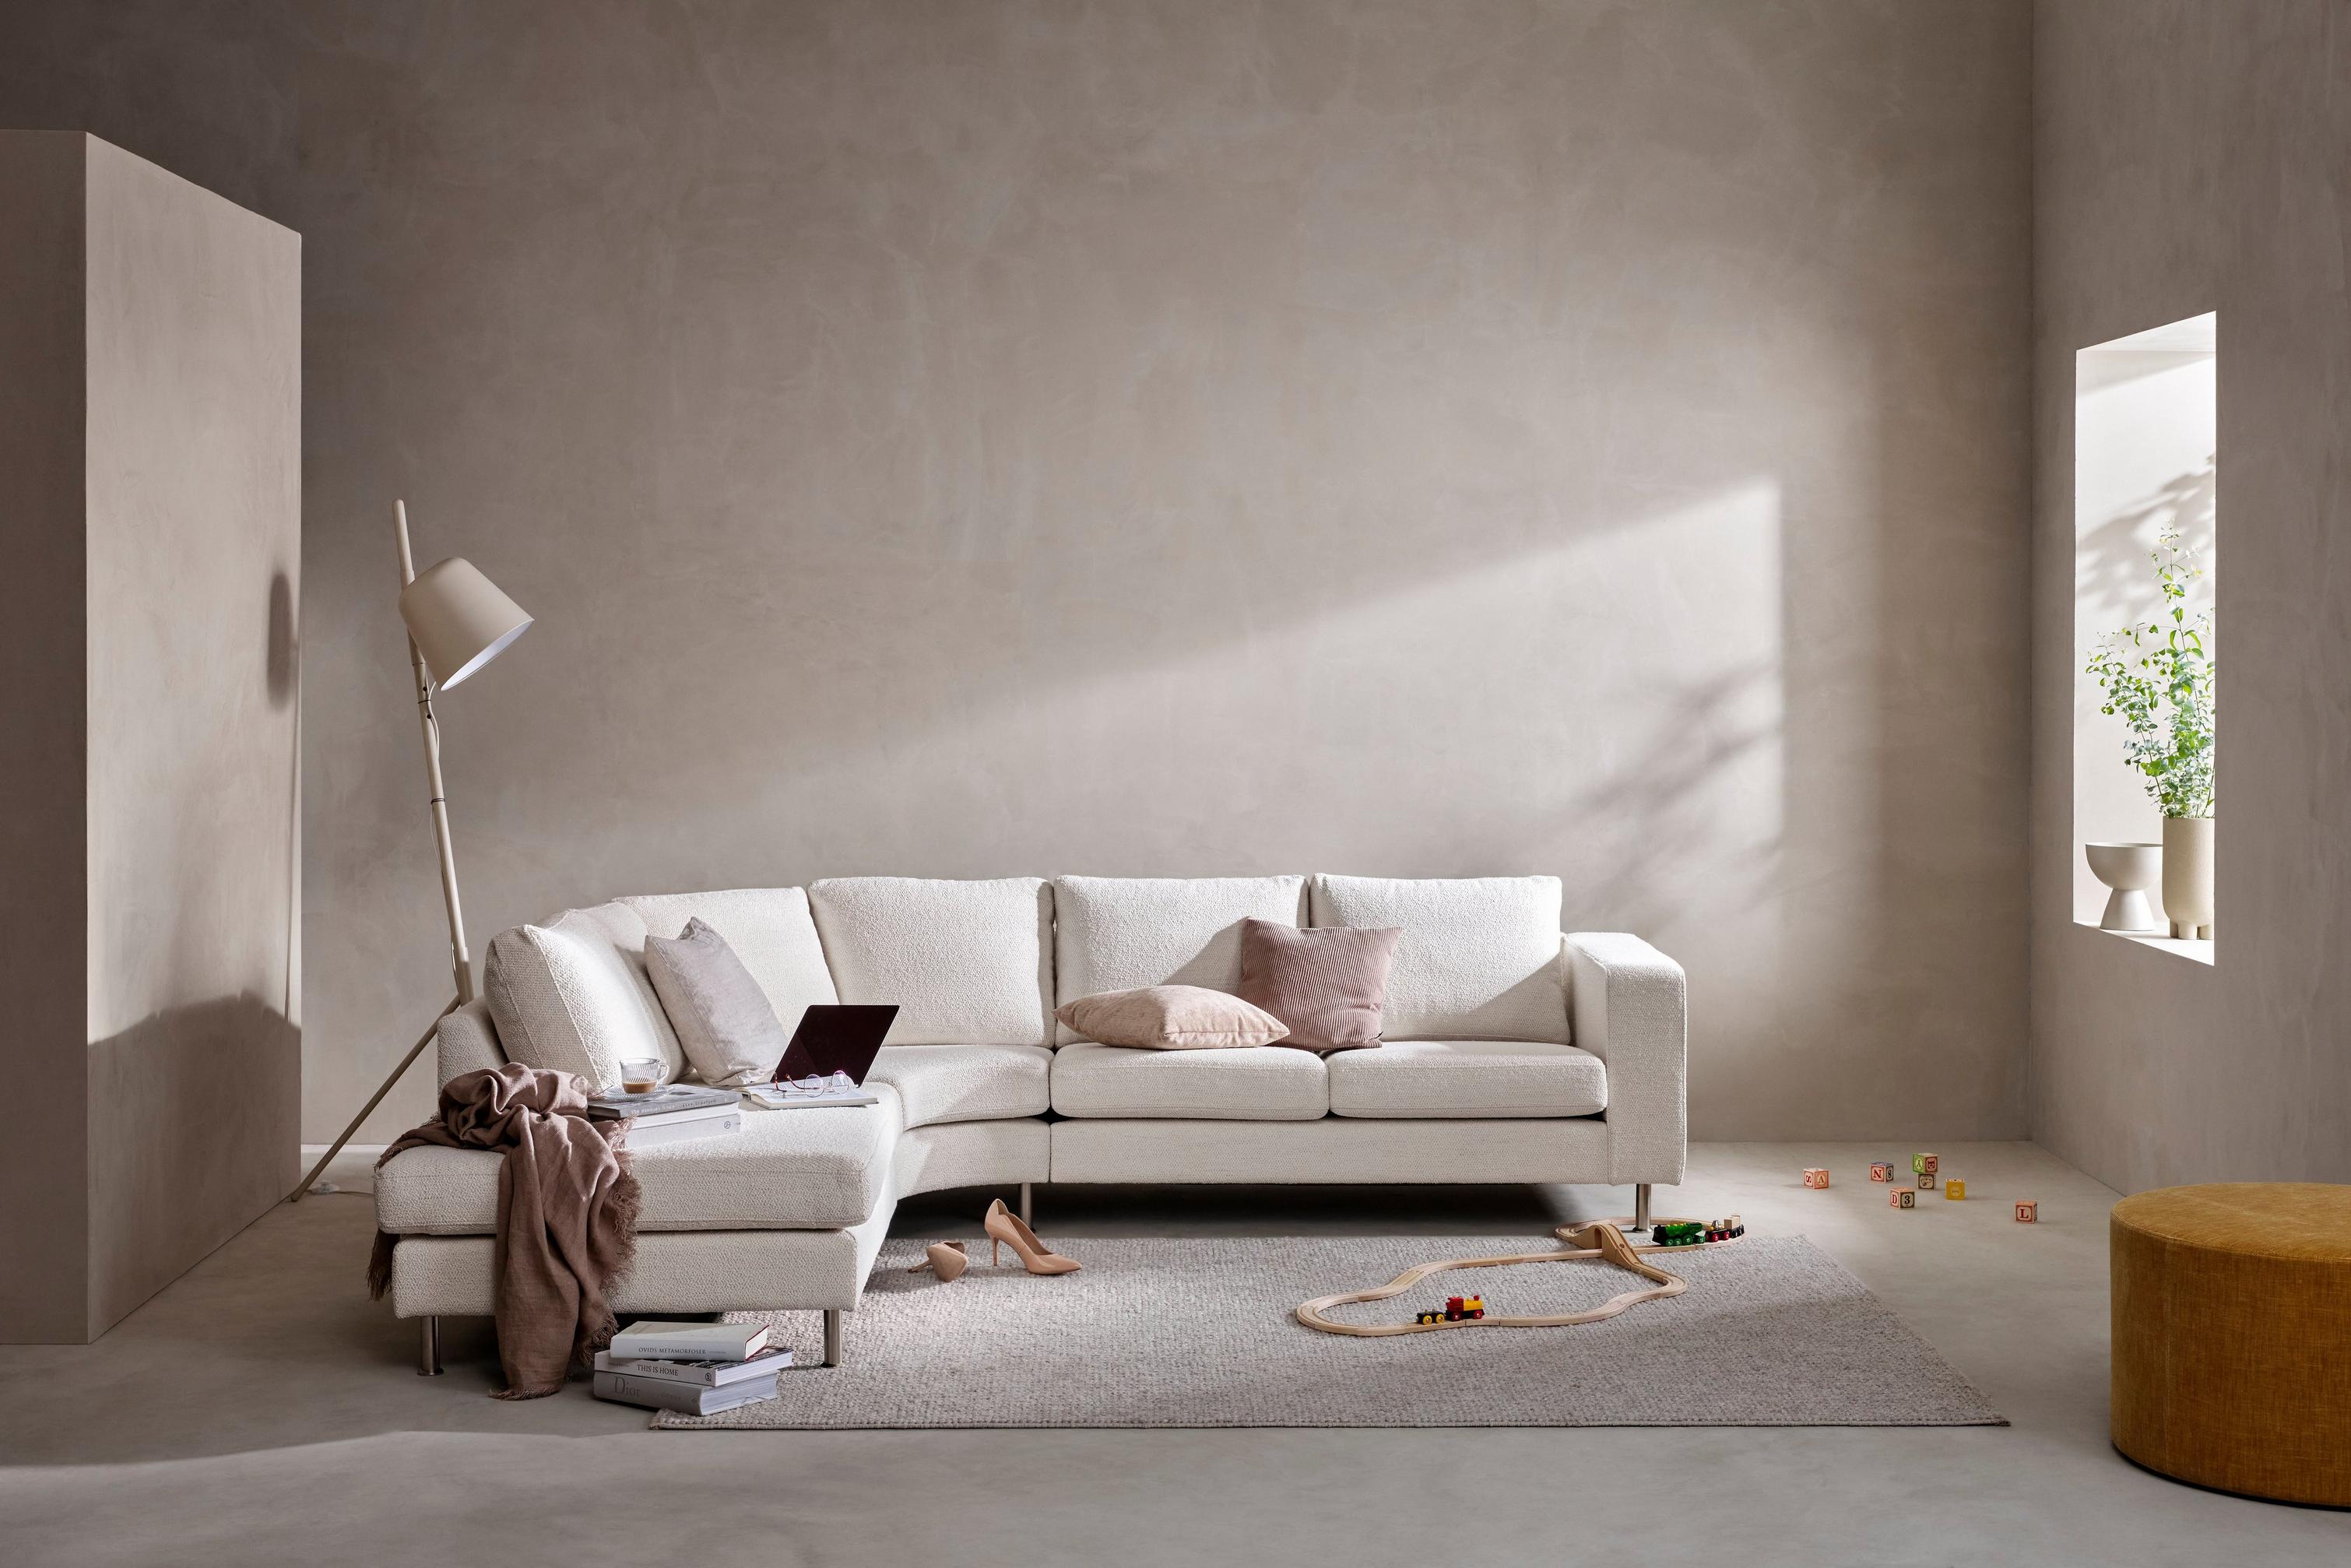 Indivi sofa placed in a small gray-ish room